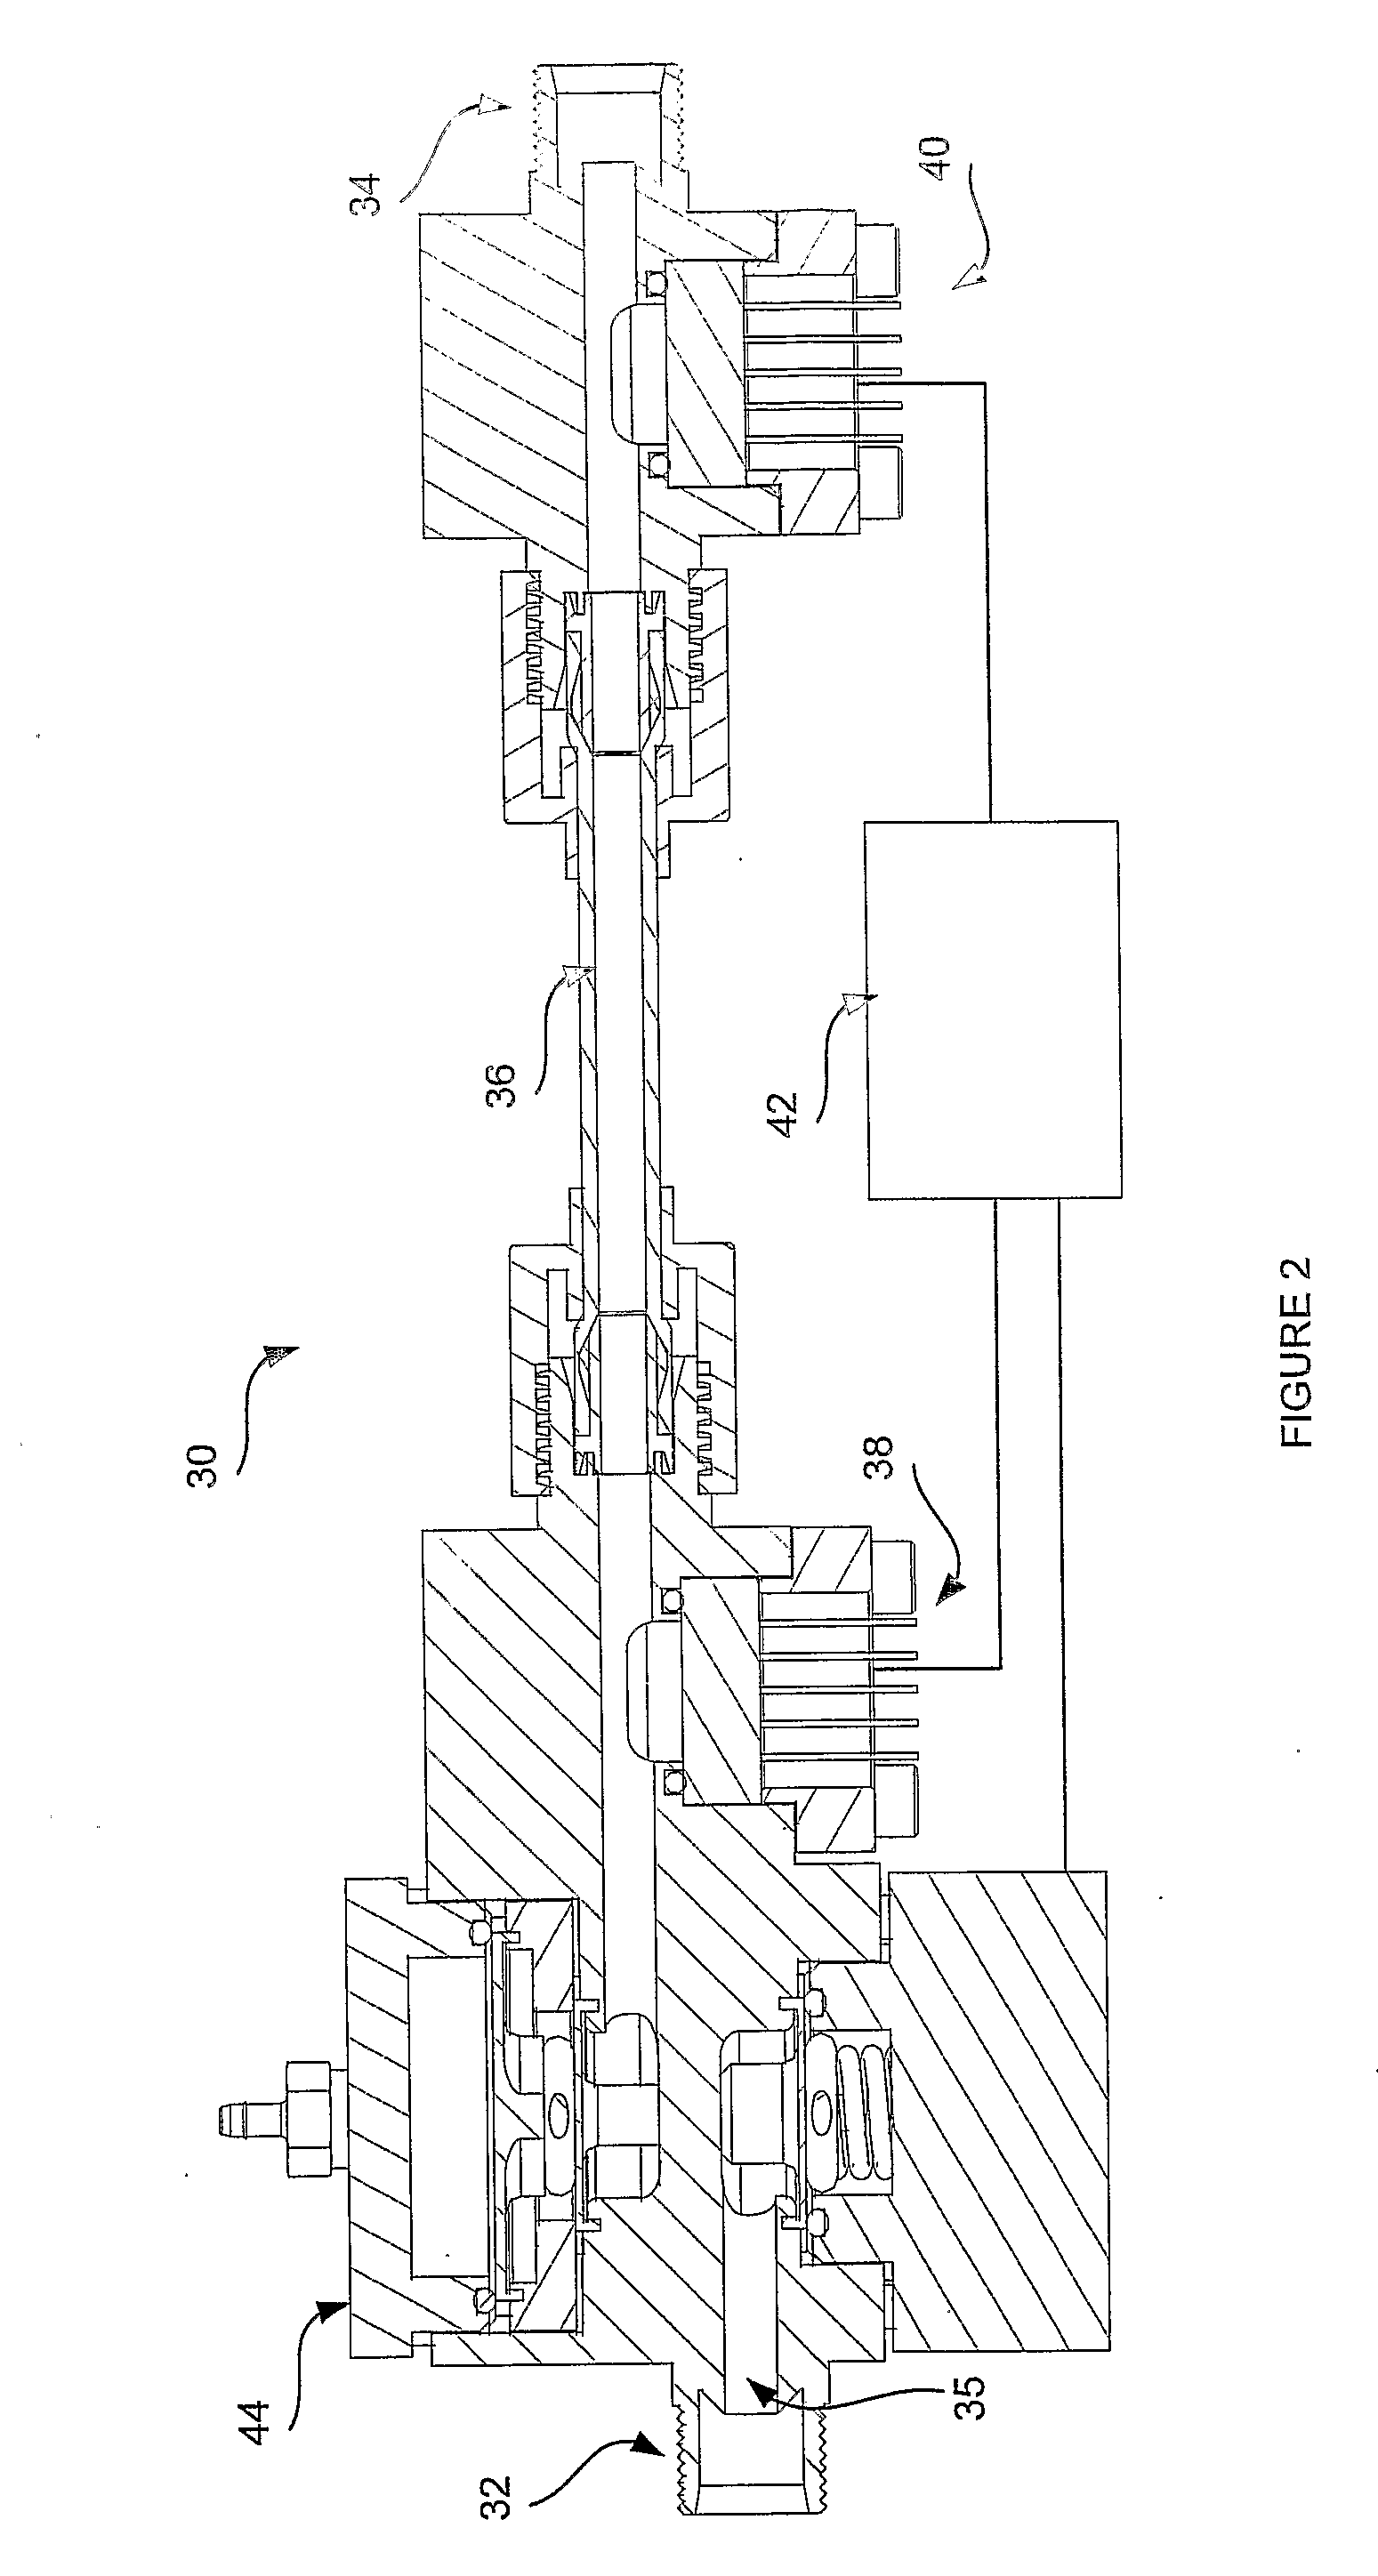 System and Method for Calibration of a Flow Device